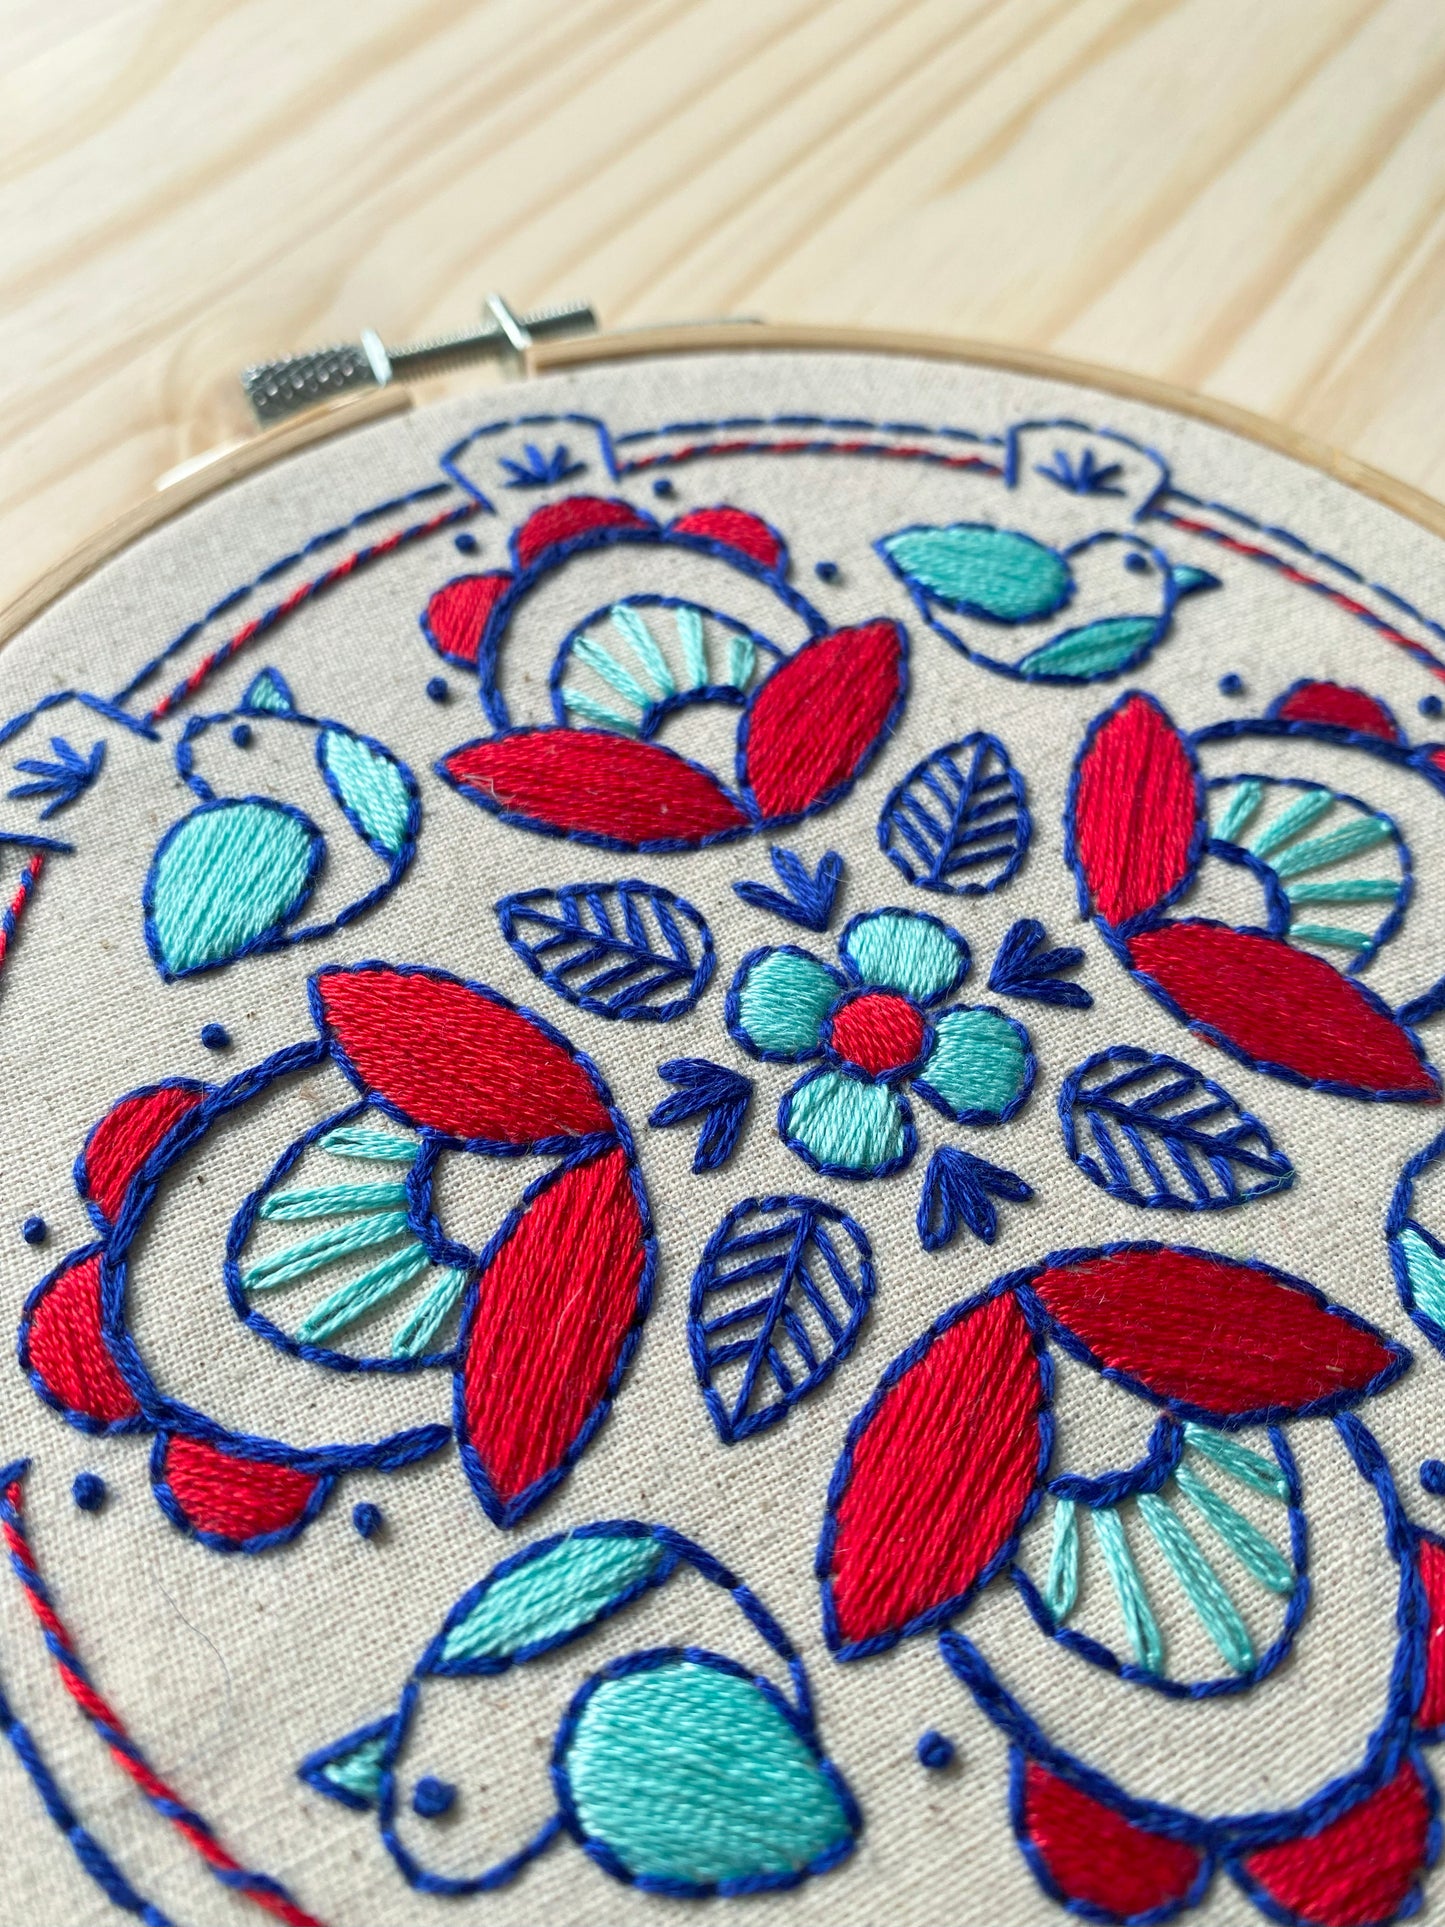 Drum Complete Embroidery Kit